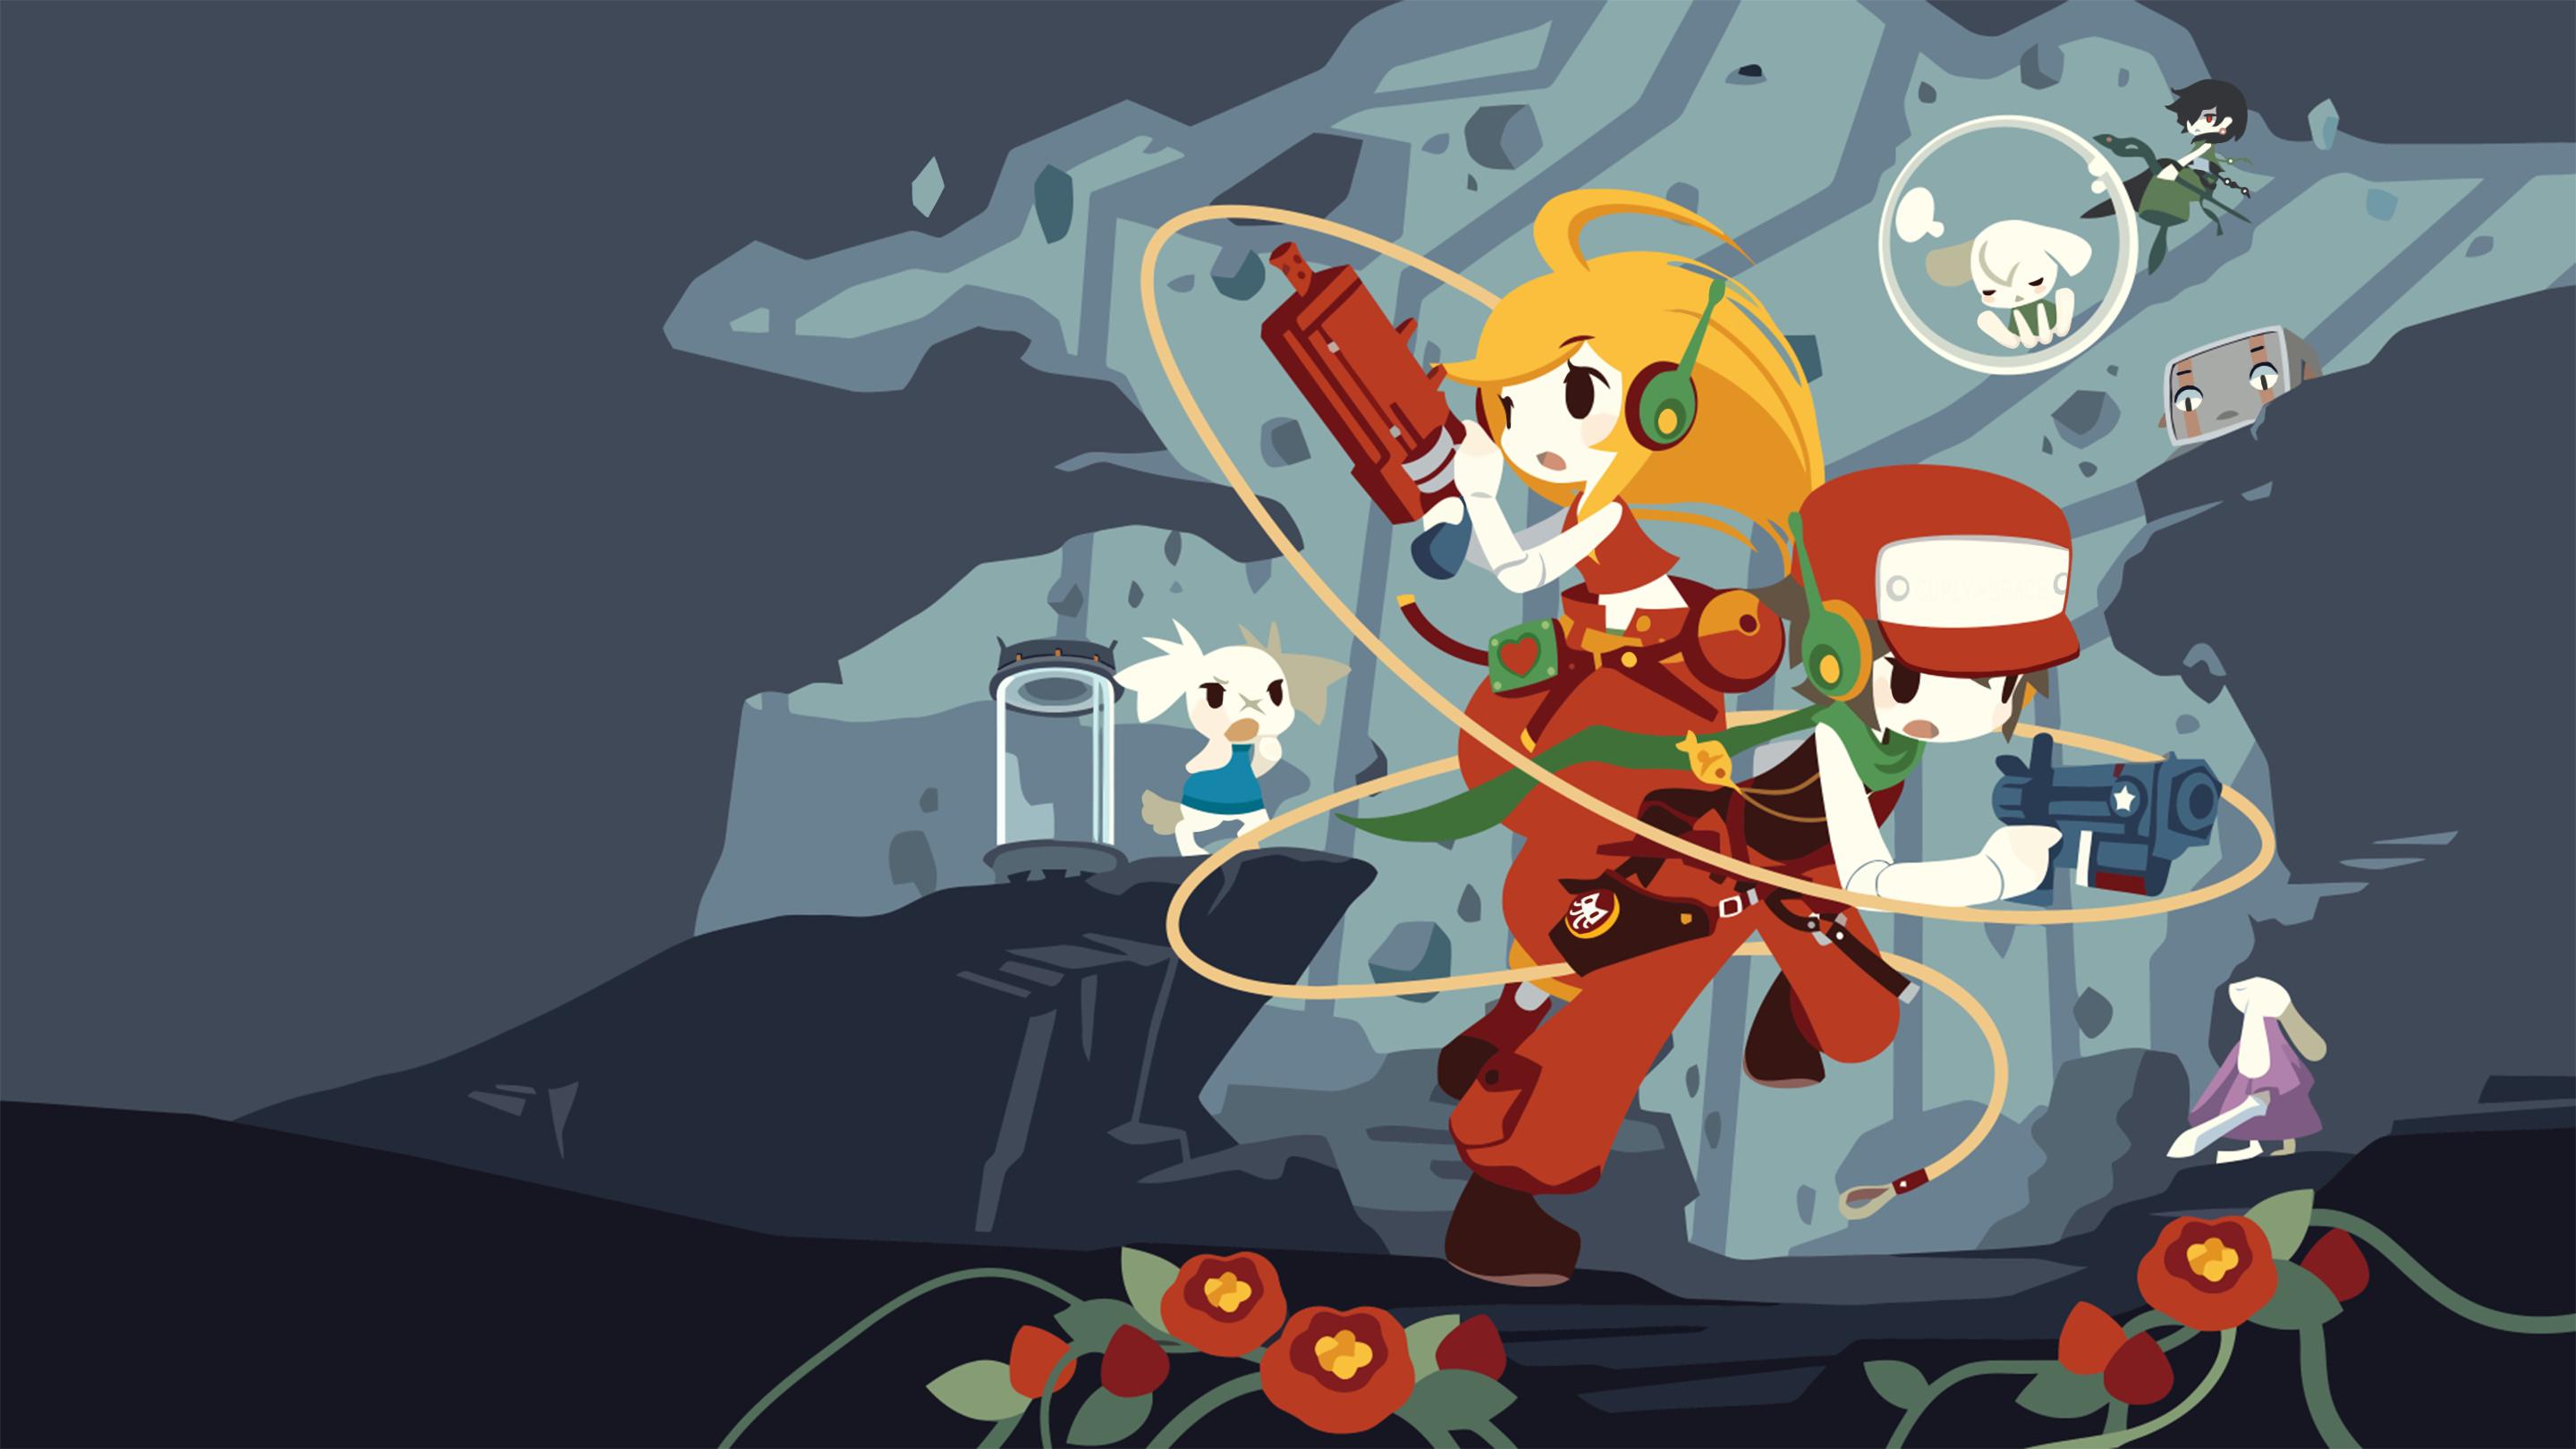 Aggregate Cave Story Wallpaper Super Hot In Cdgdbentre